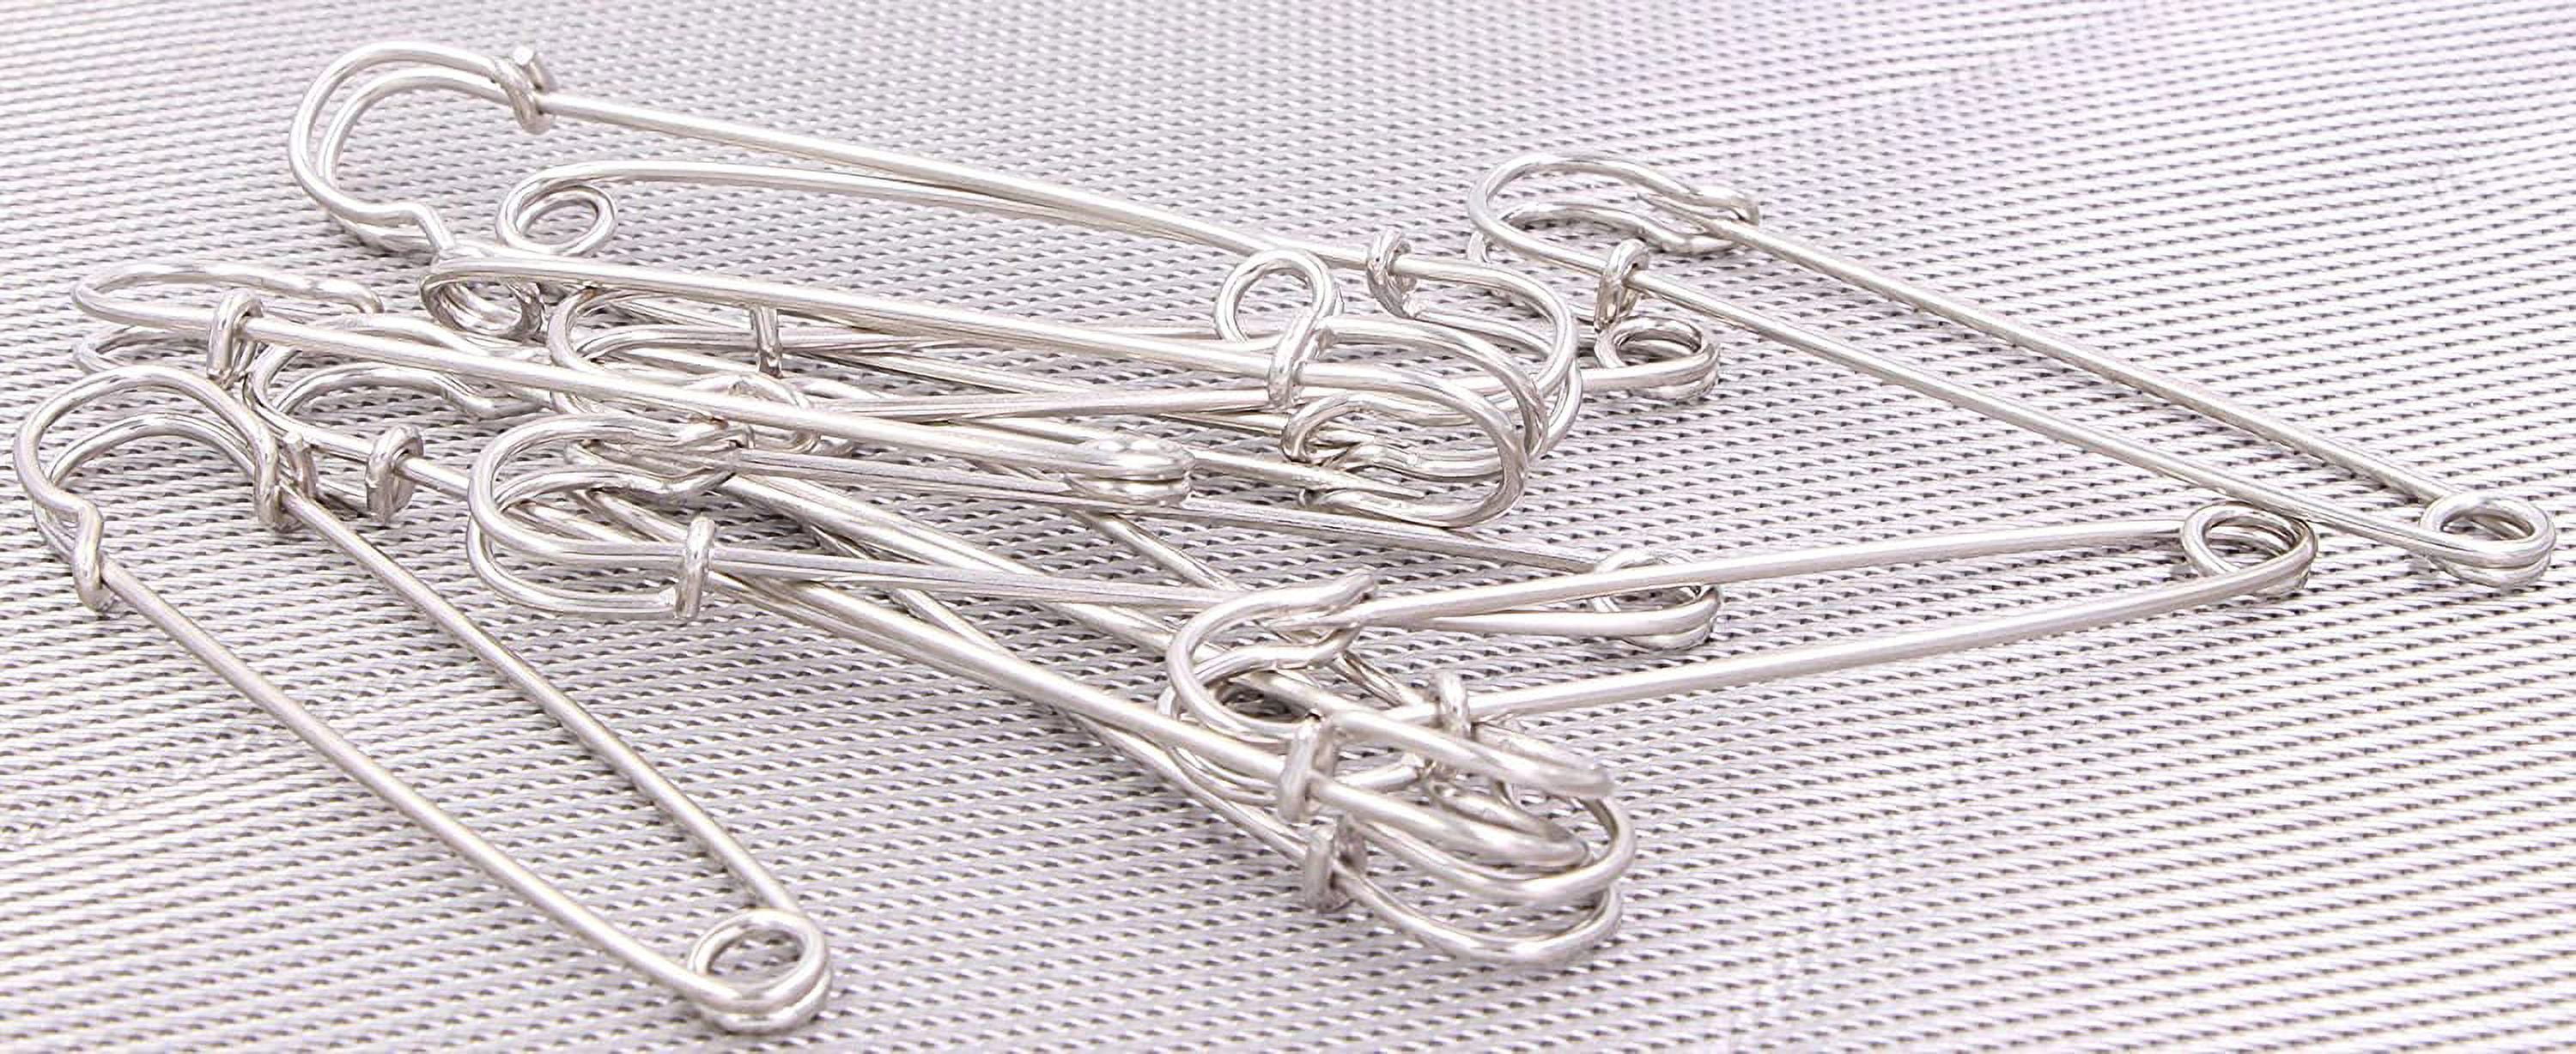 10PCS 5cm/2''Silver Stainless Steel Heavy Duty Safety Pins Extra Strong  Steel Metal Spring Lock Pin Fasteners for Blankets Skirts Kilts and DIY Art